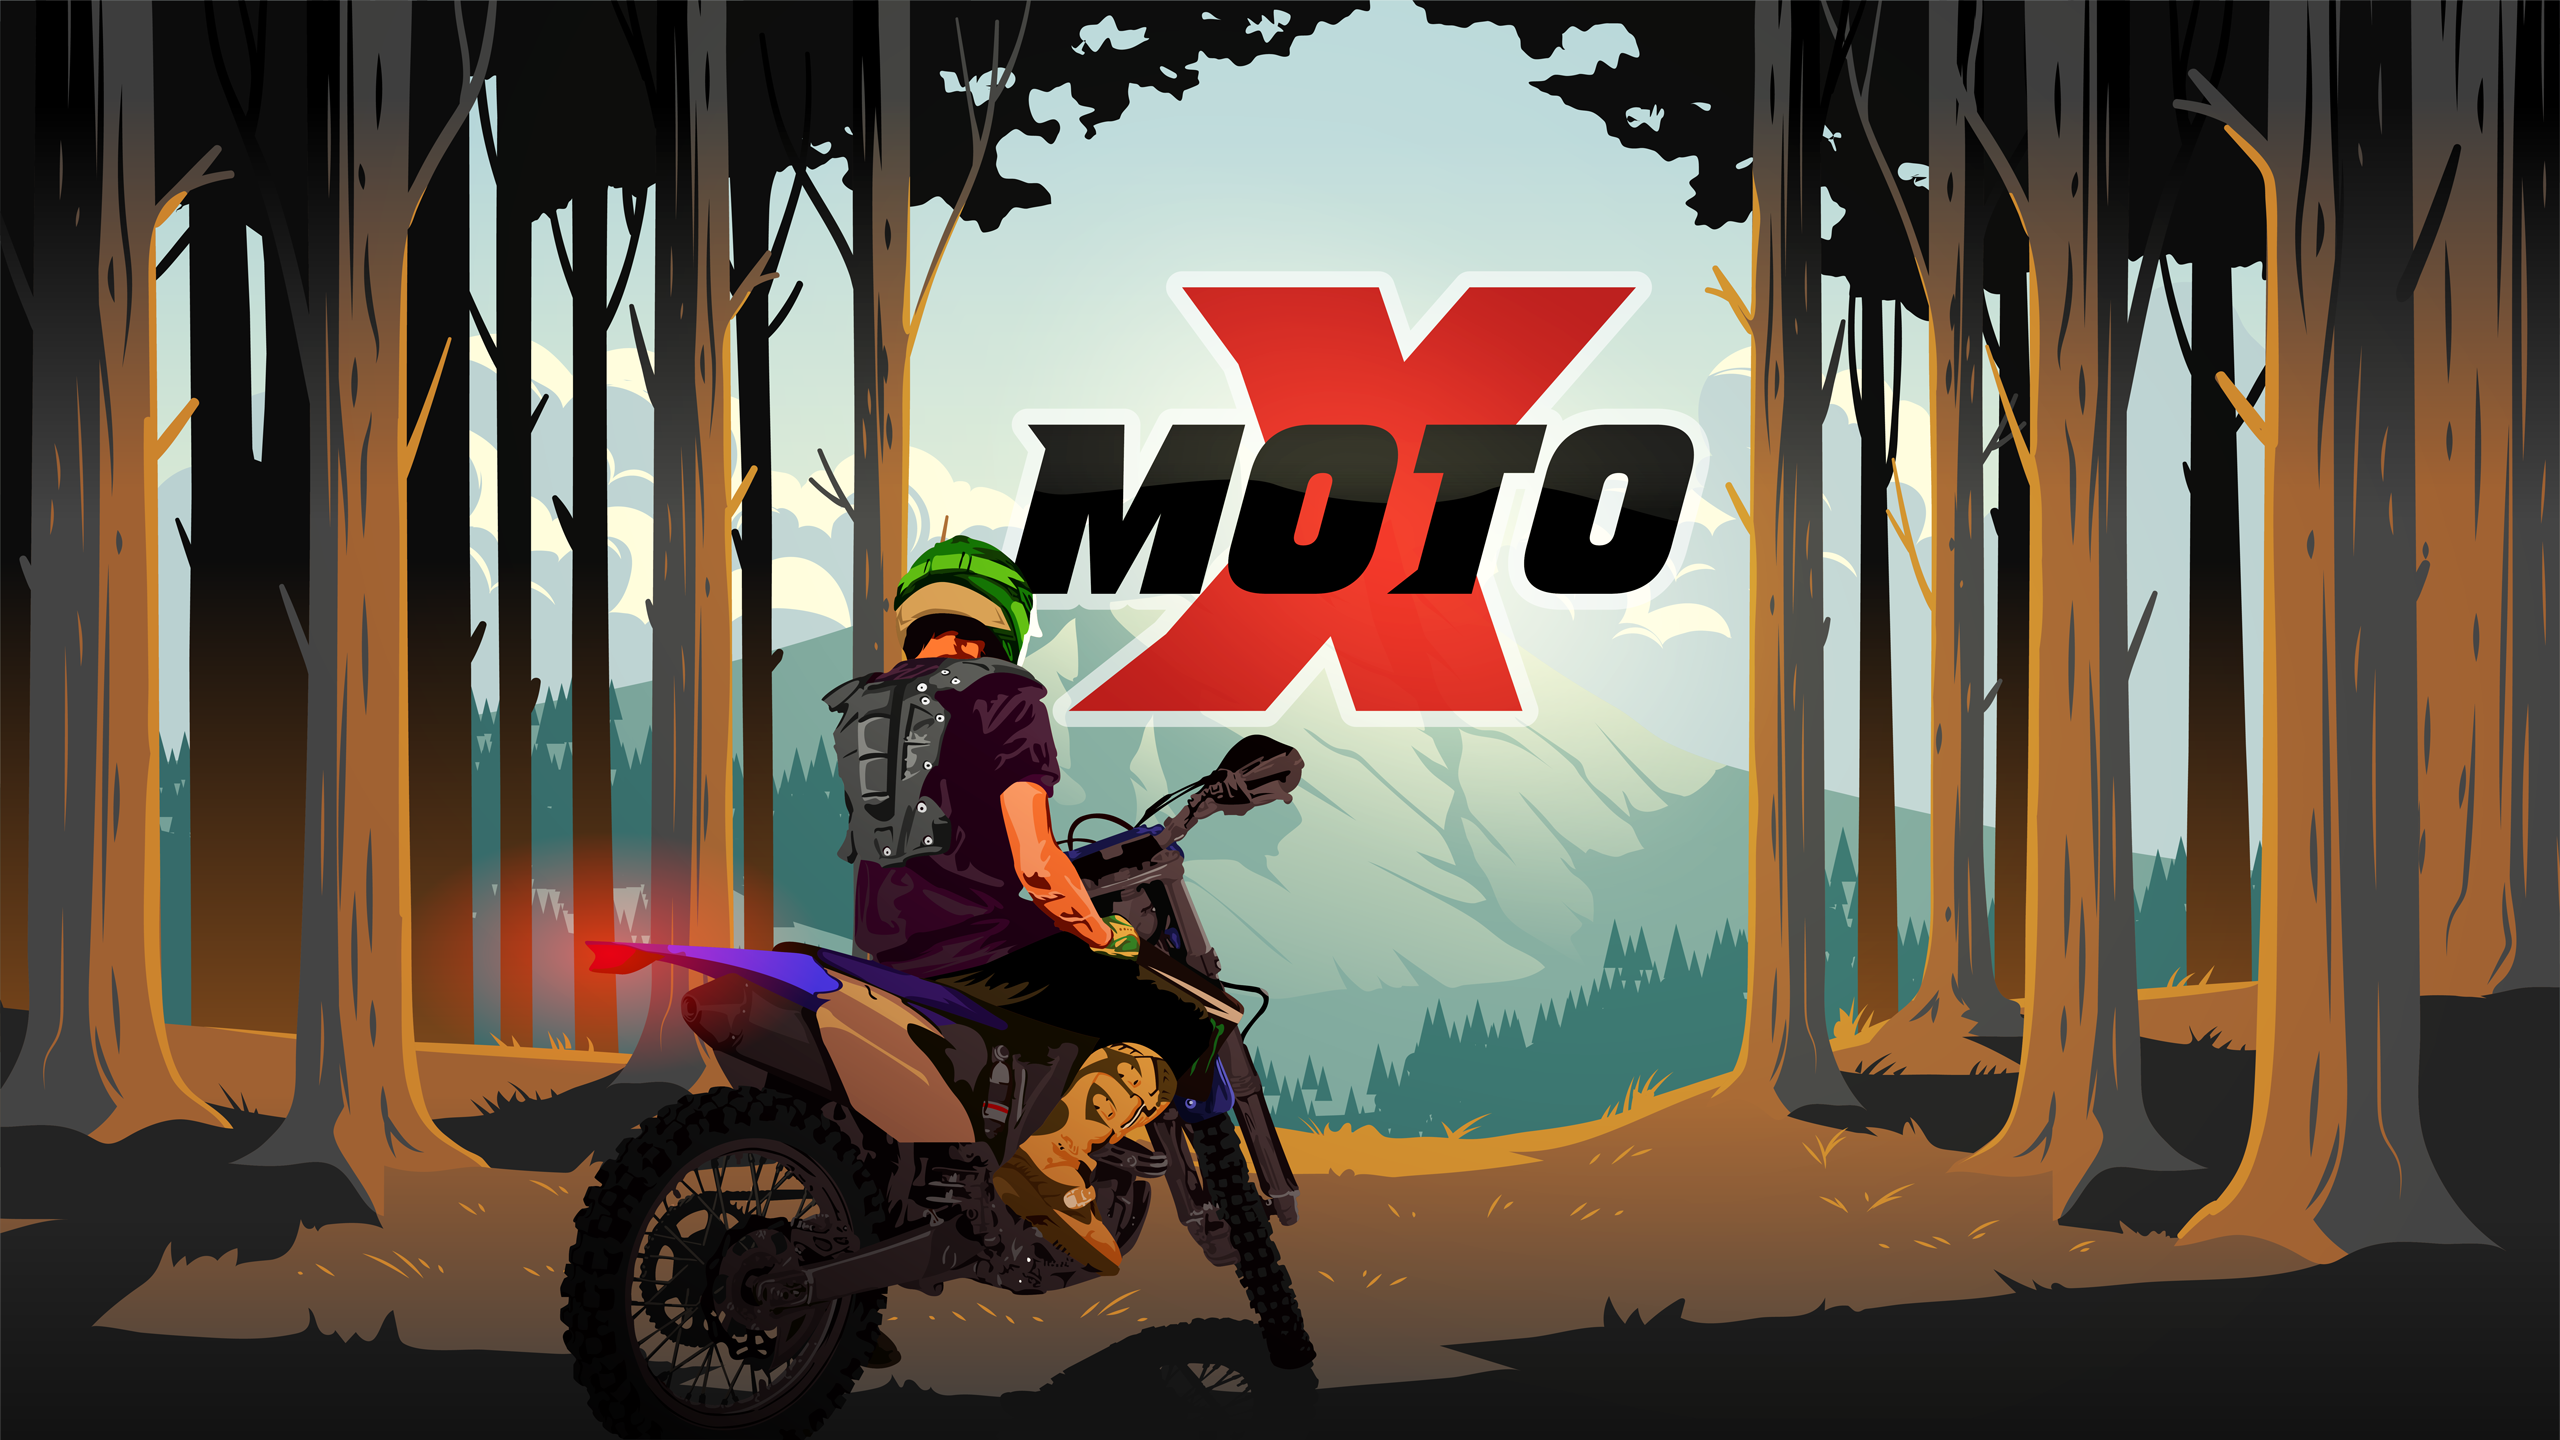 Moto X' Is A Simple But Fun VR Motocross Game On Quest - VRScout